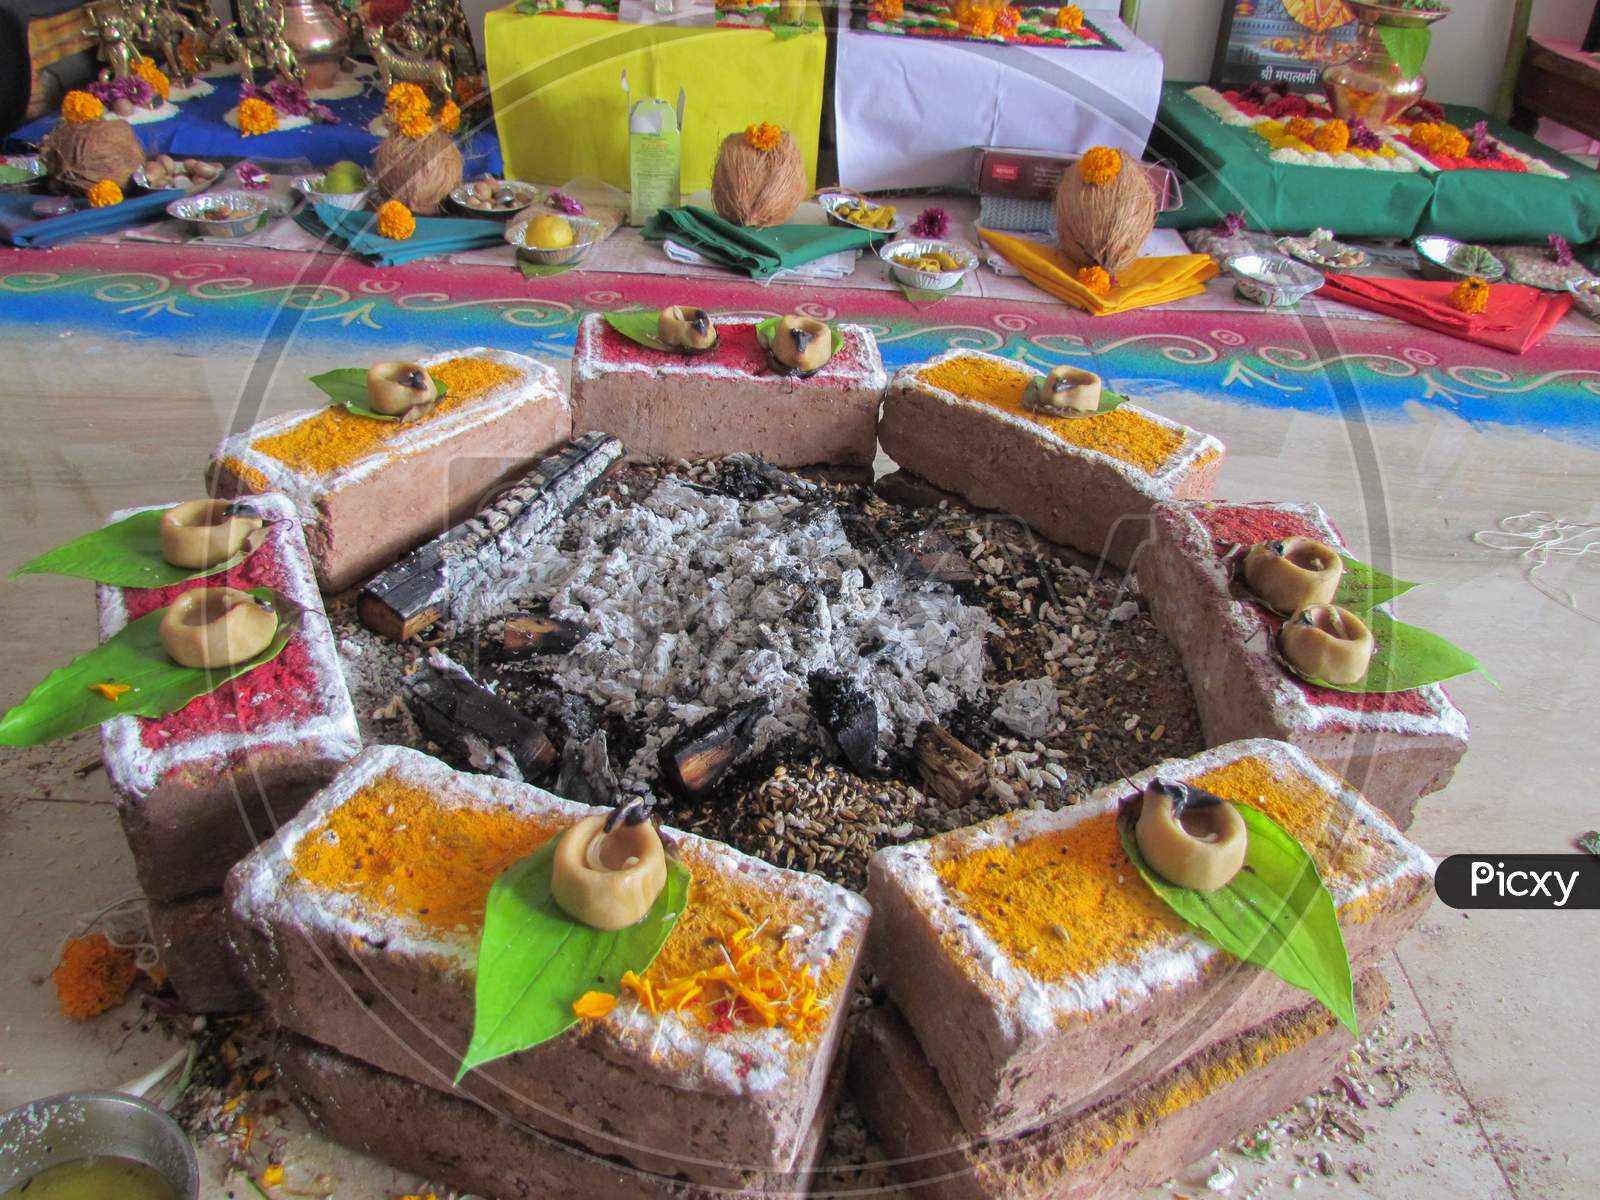 A fire place with burnt ash in the middle used for Hindu religious ceremonies